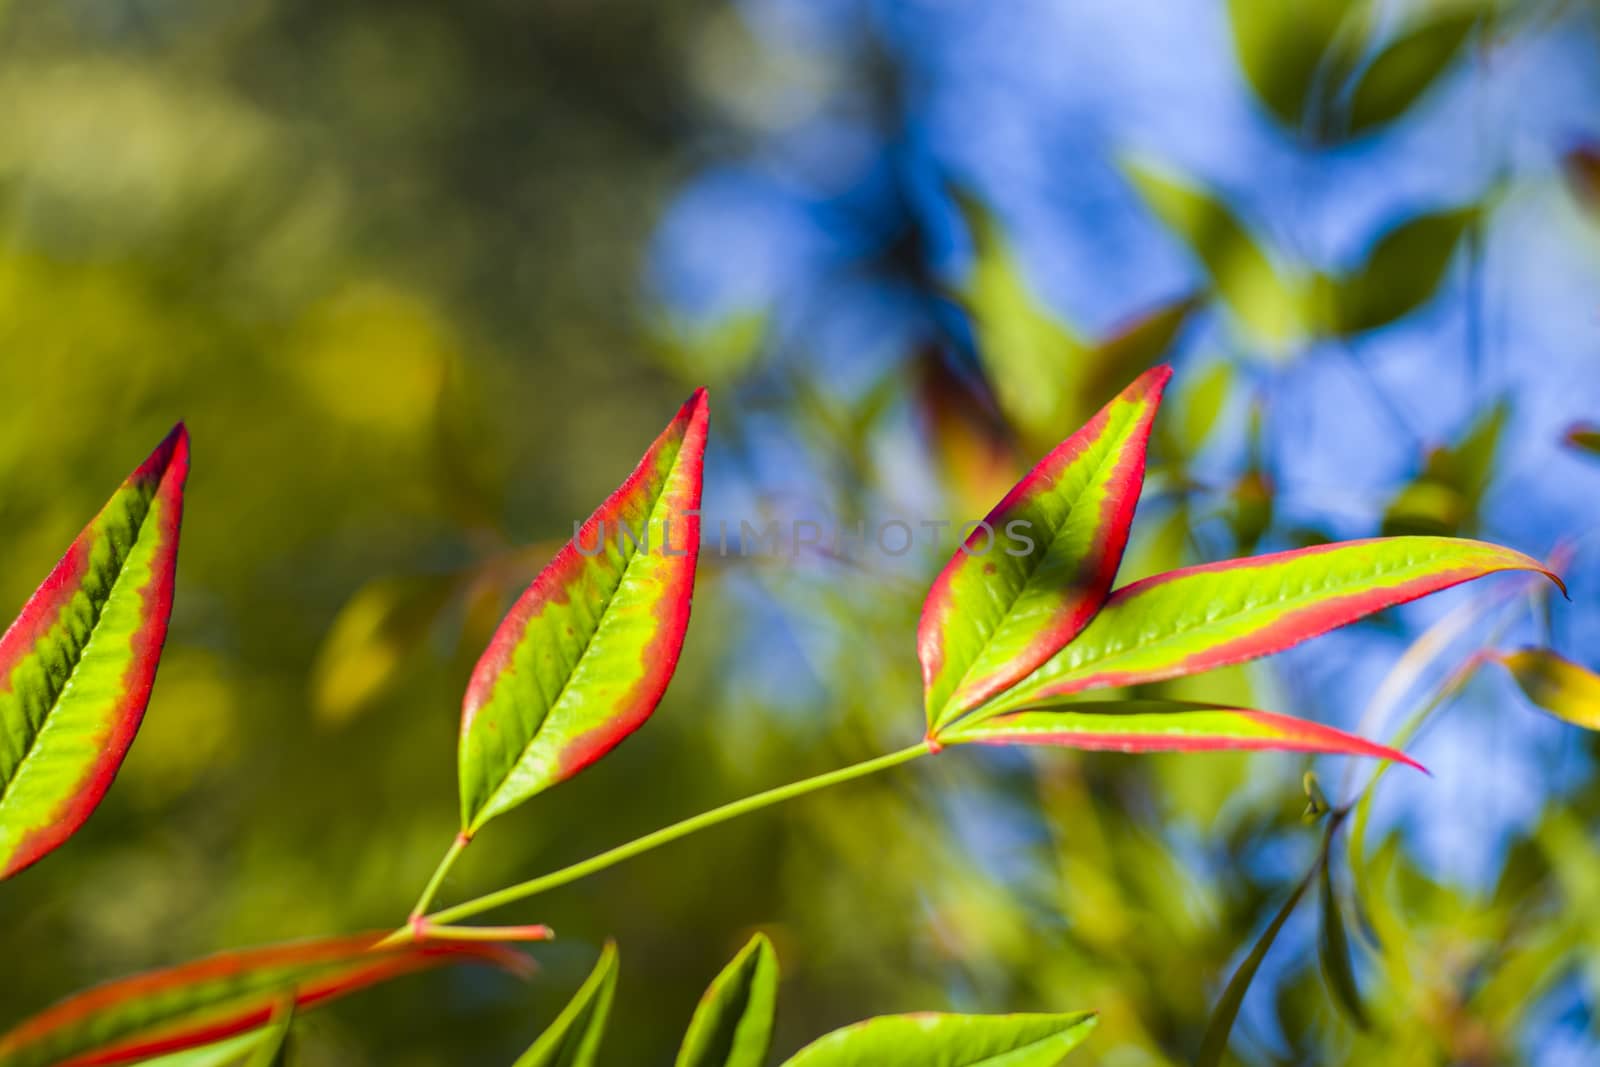 Nandina domestica leaves on the bokeh background, nature background by Taidundua